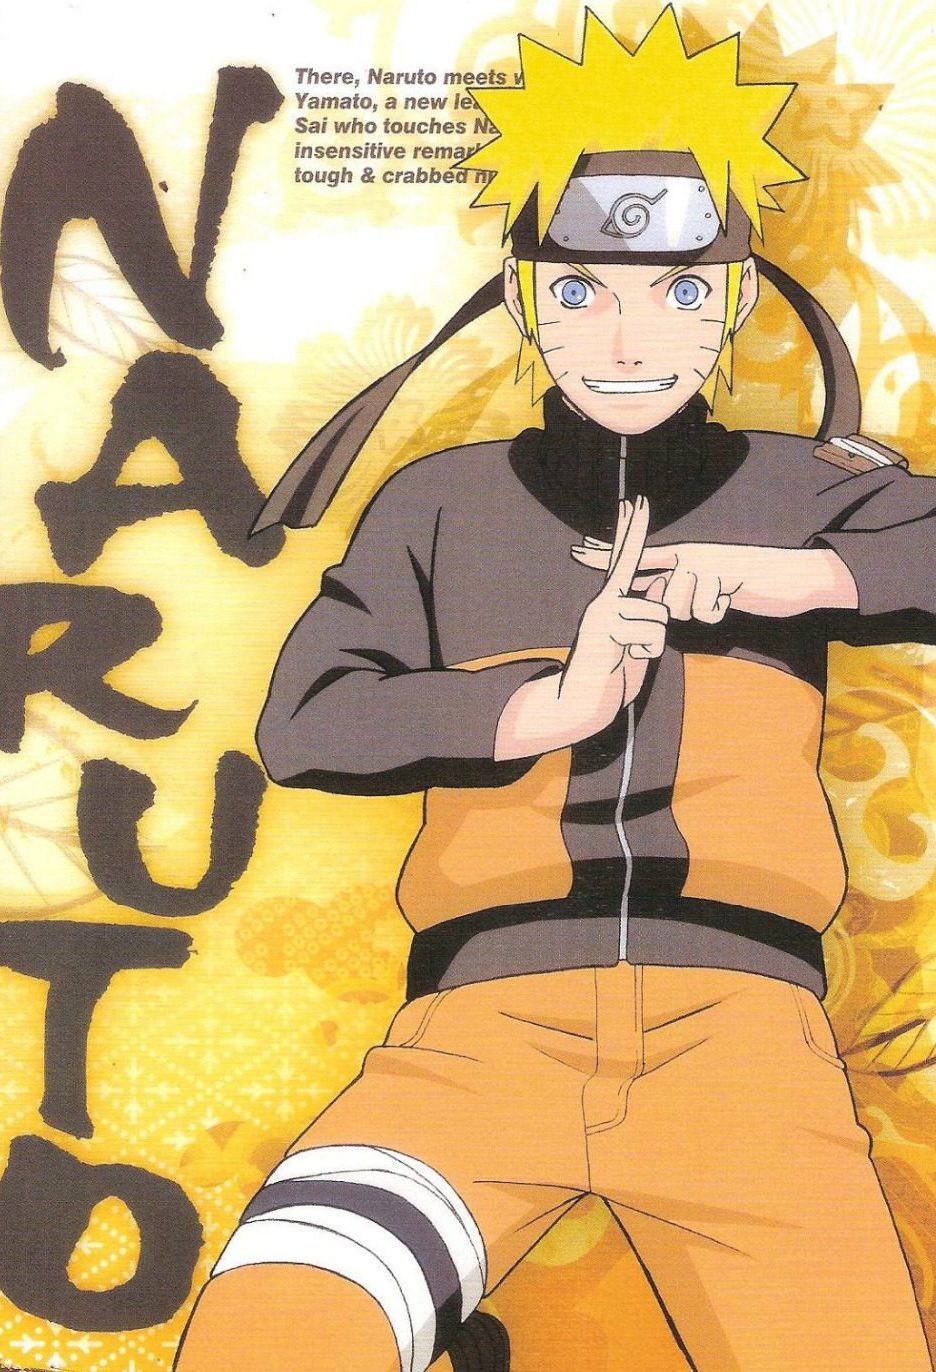 NARUTO SHIPPUDEN CHARACTERS POSTER, JAPANESE ANIME COMIC NEW 24x36